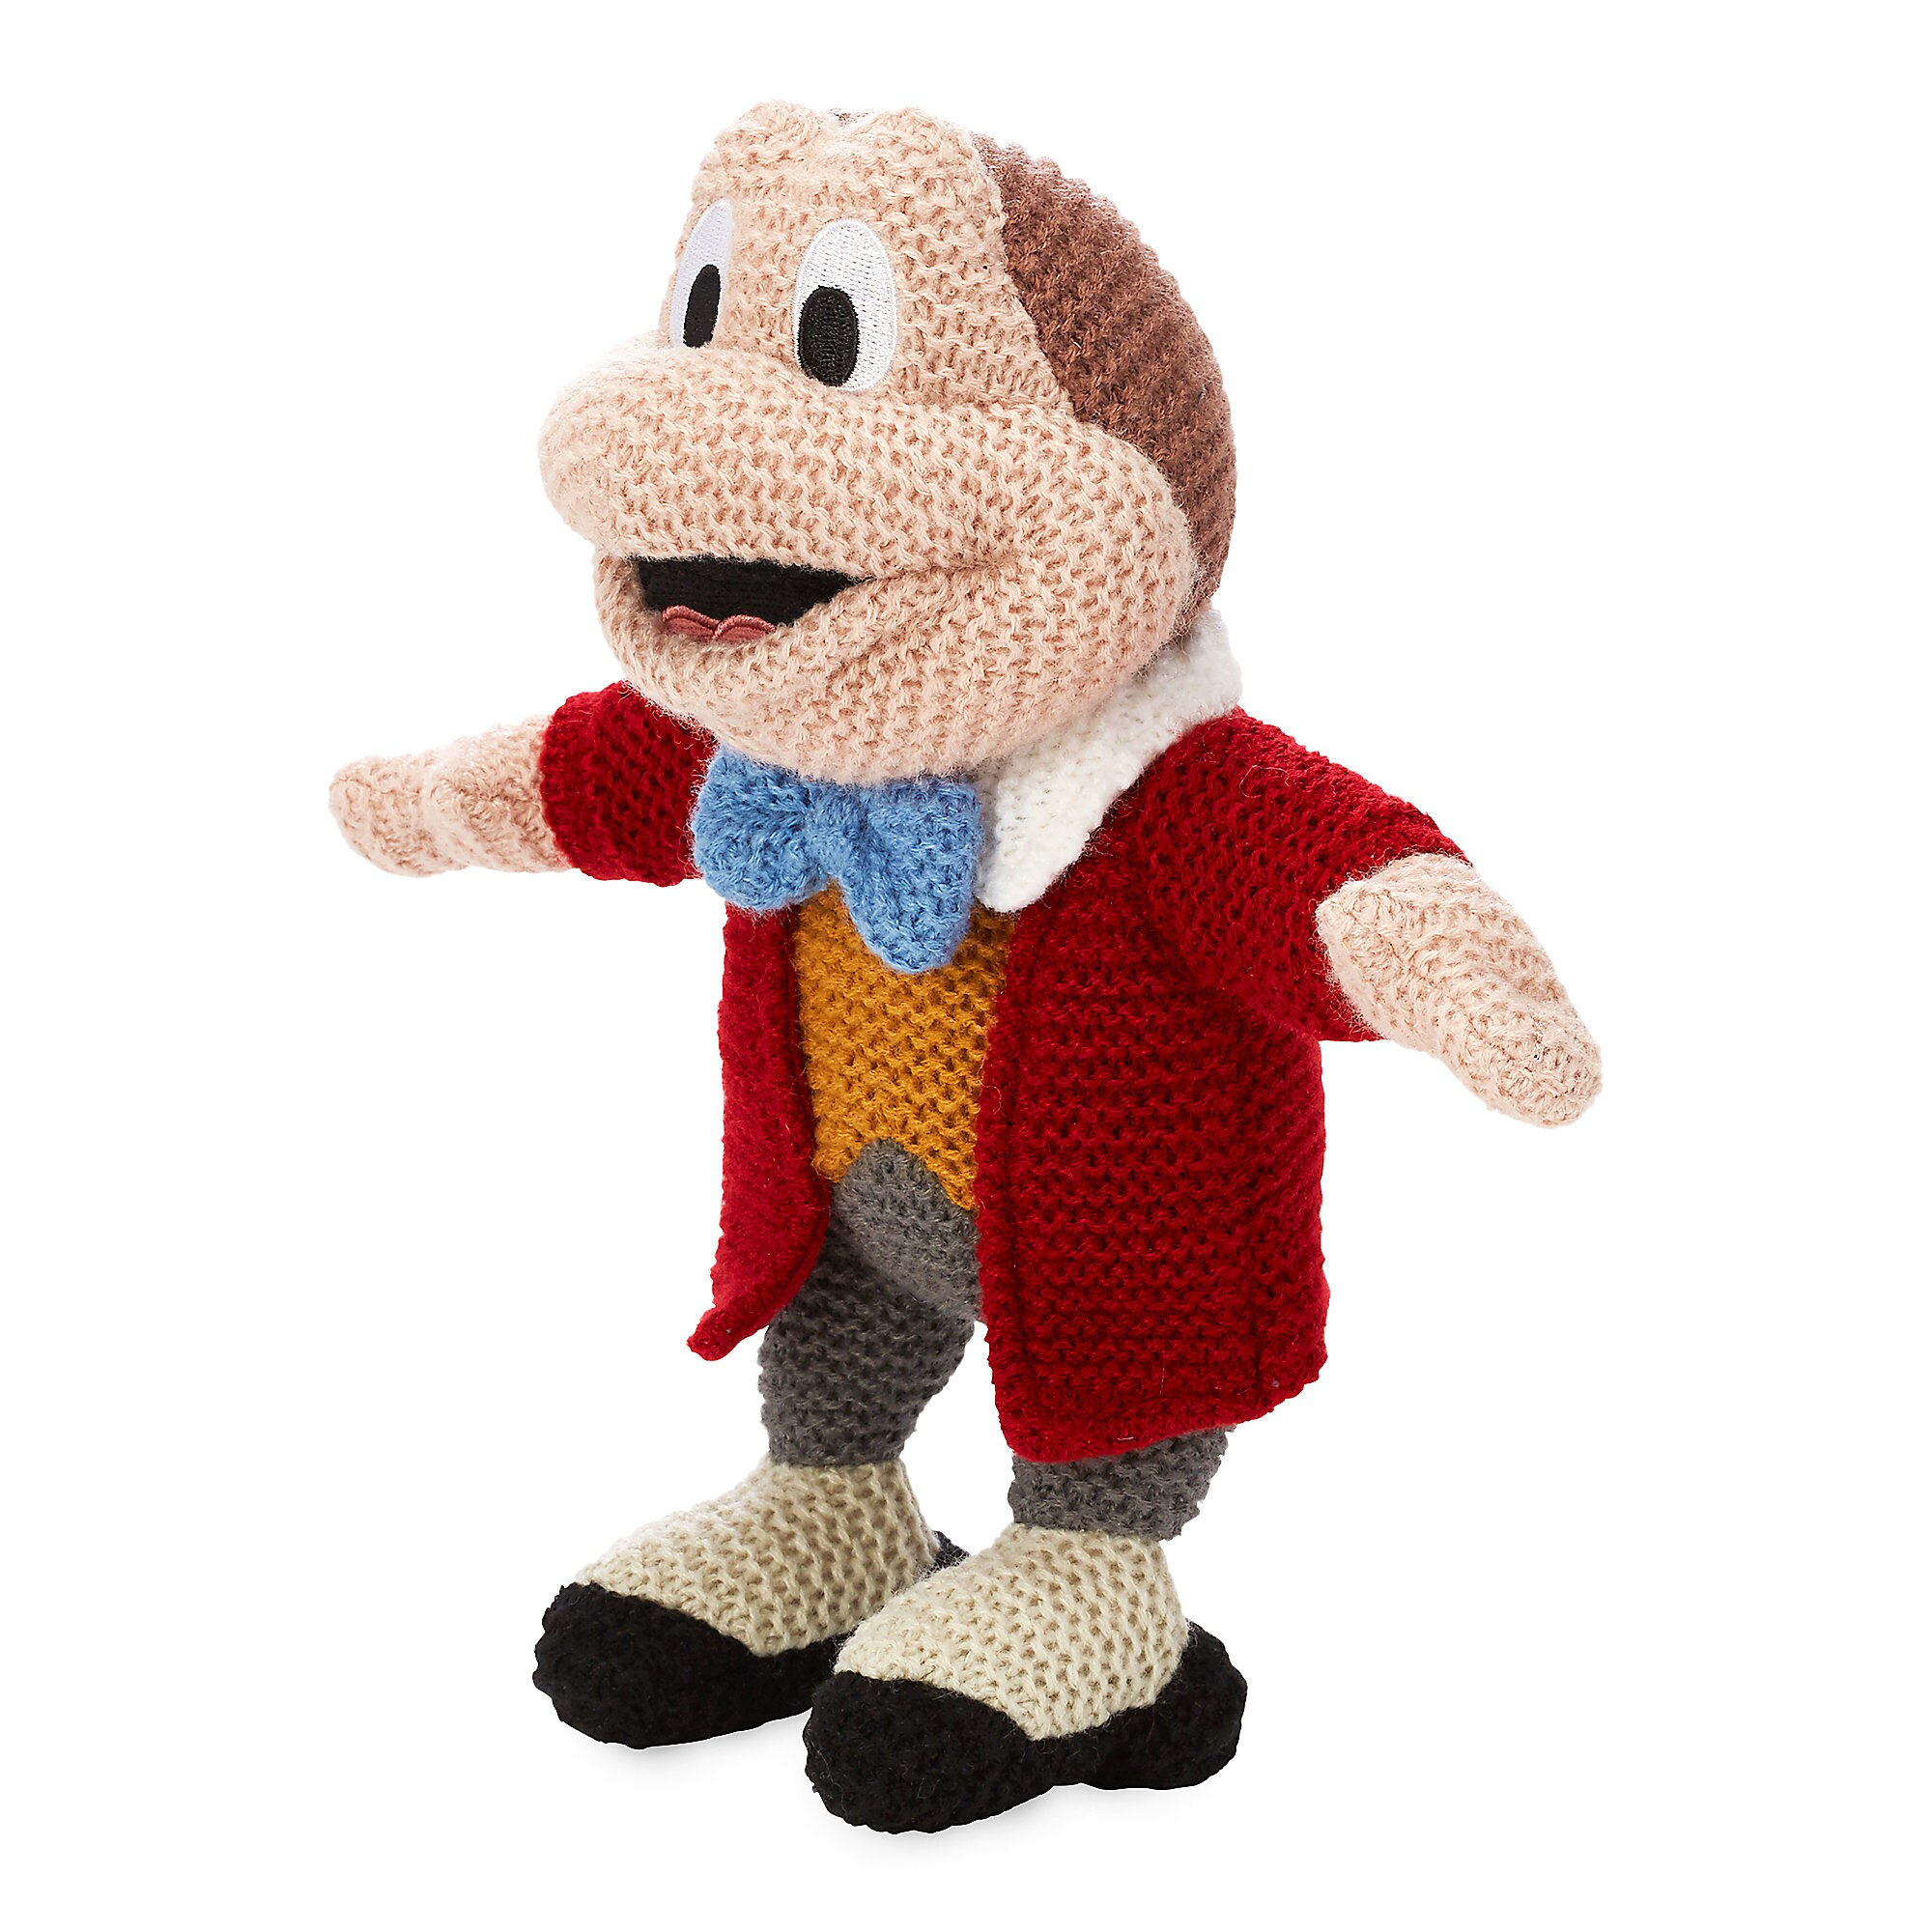 Mr. Toad Knit Plush - 9'' - Limited Release